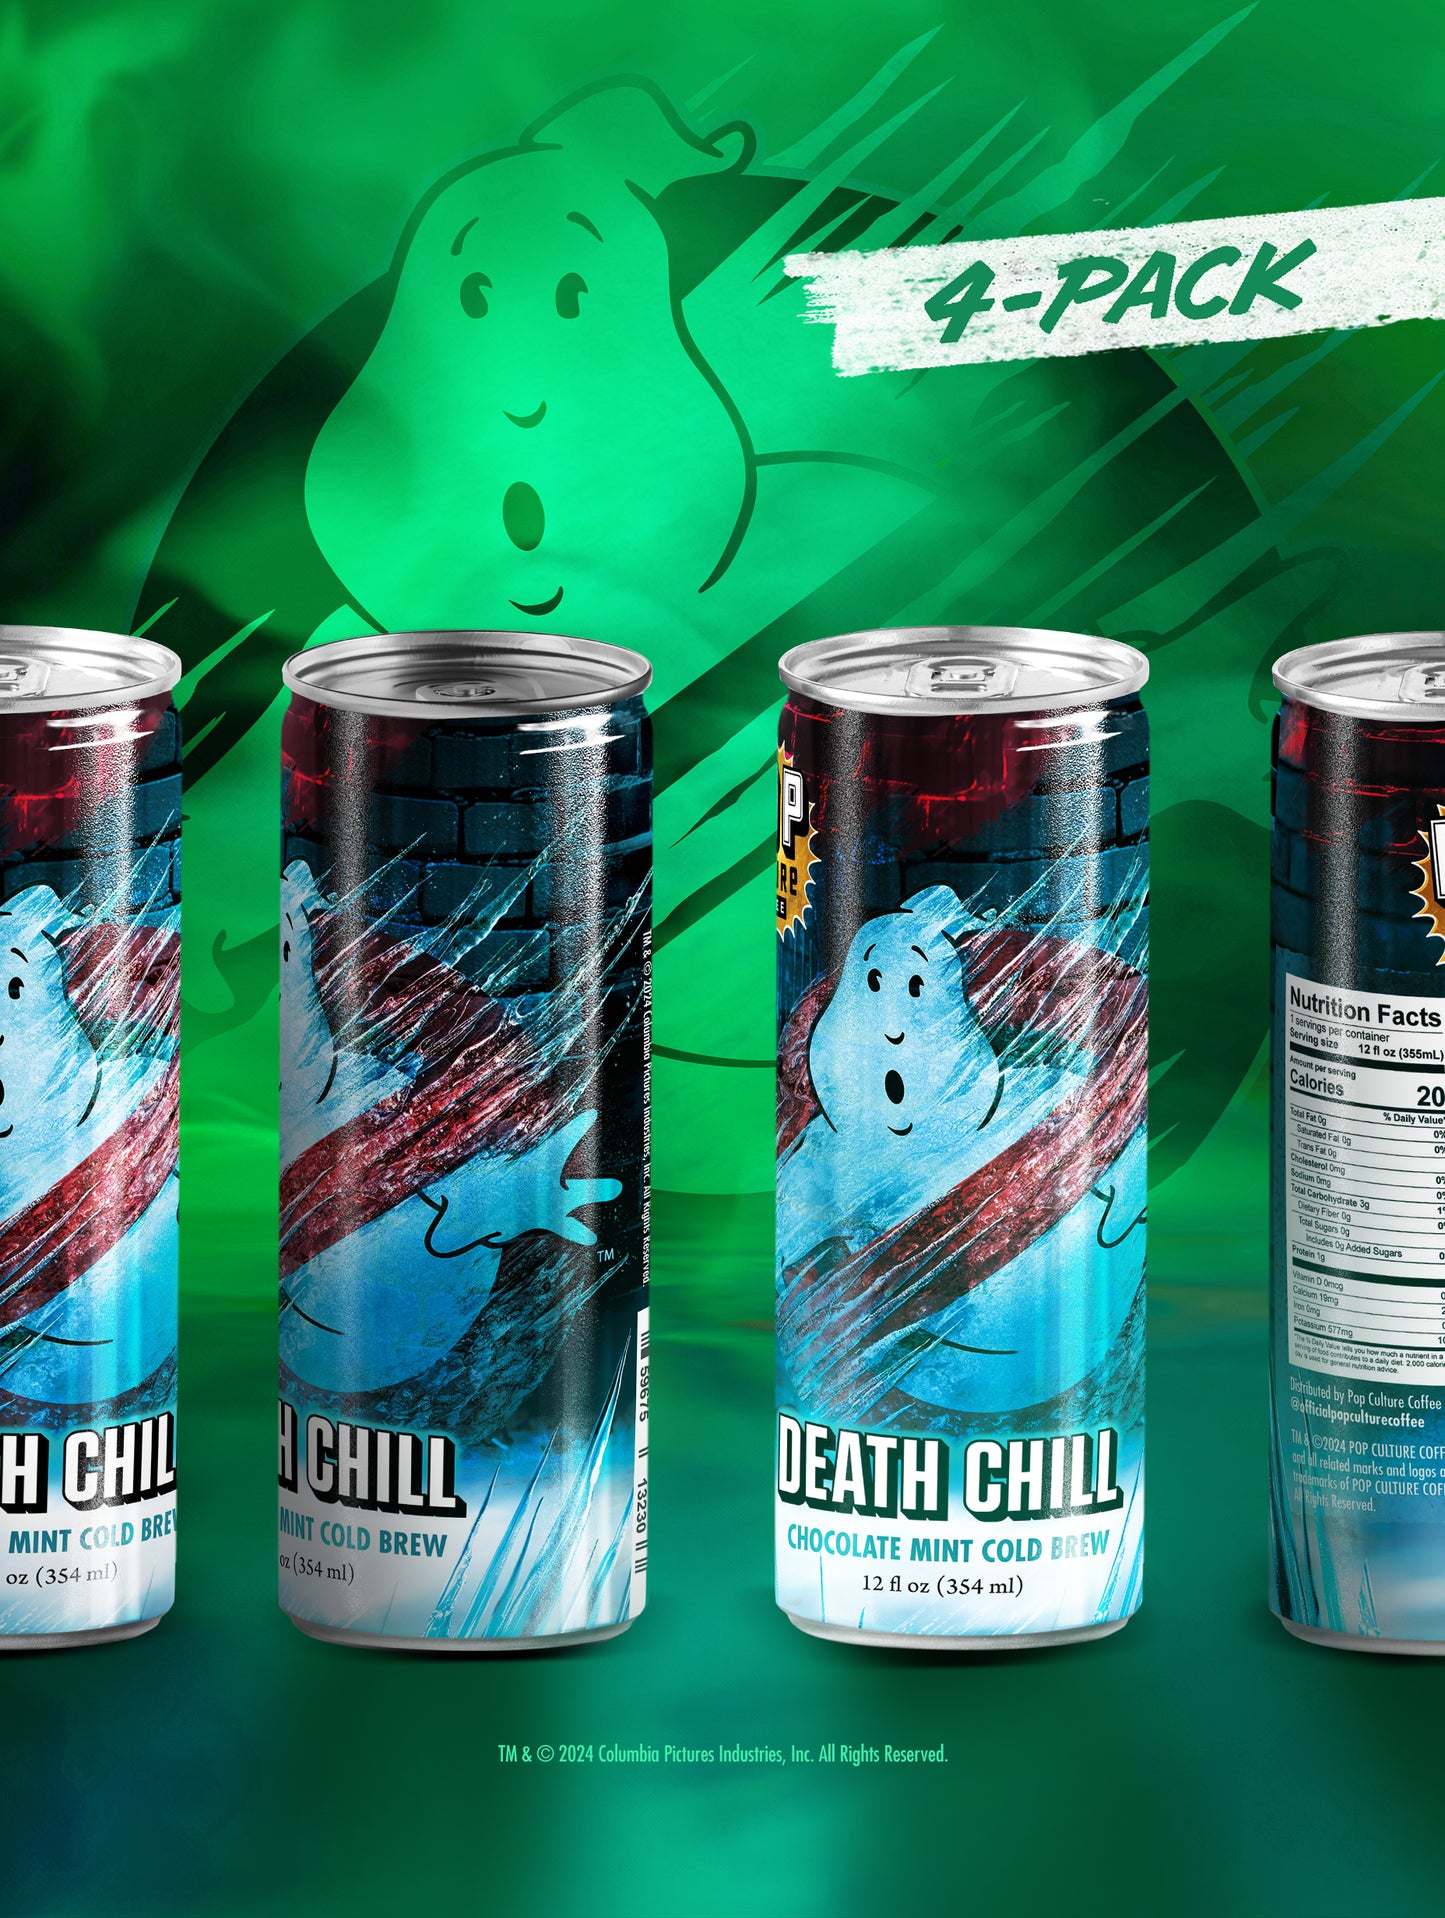 4 PACK Chocolate Mint Death Chill Cold Brew